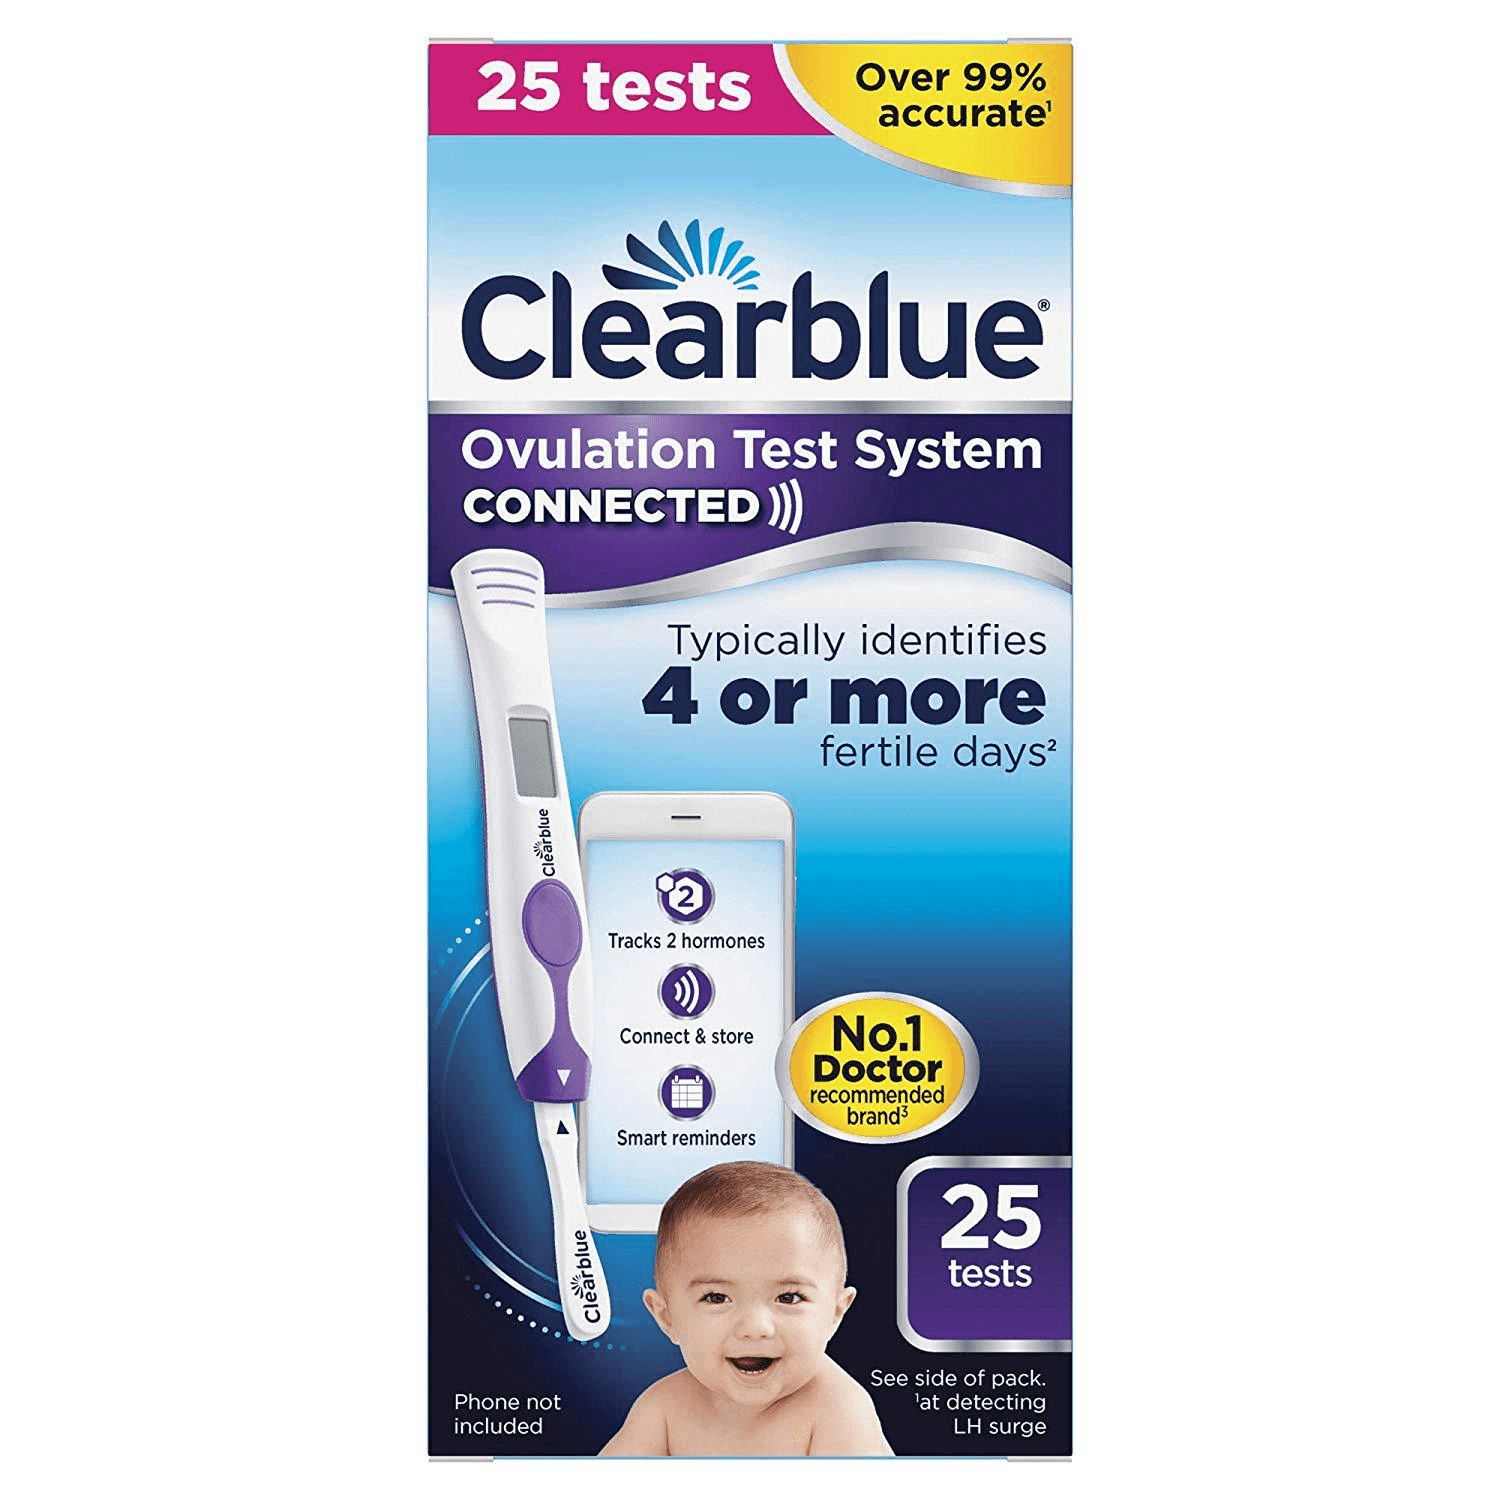 Clearblue Ovulation Connec DI